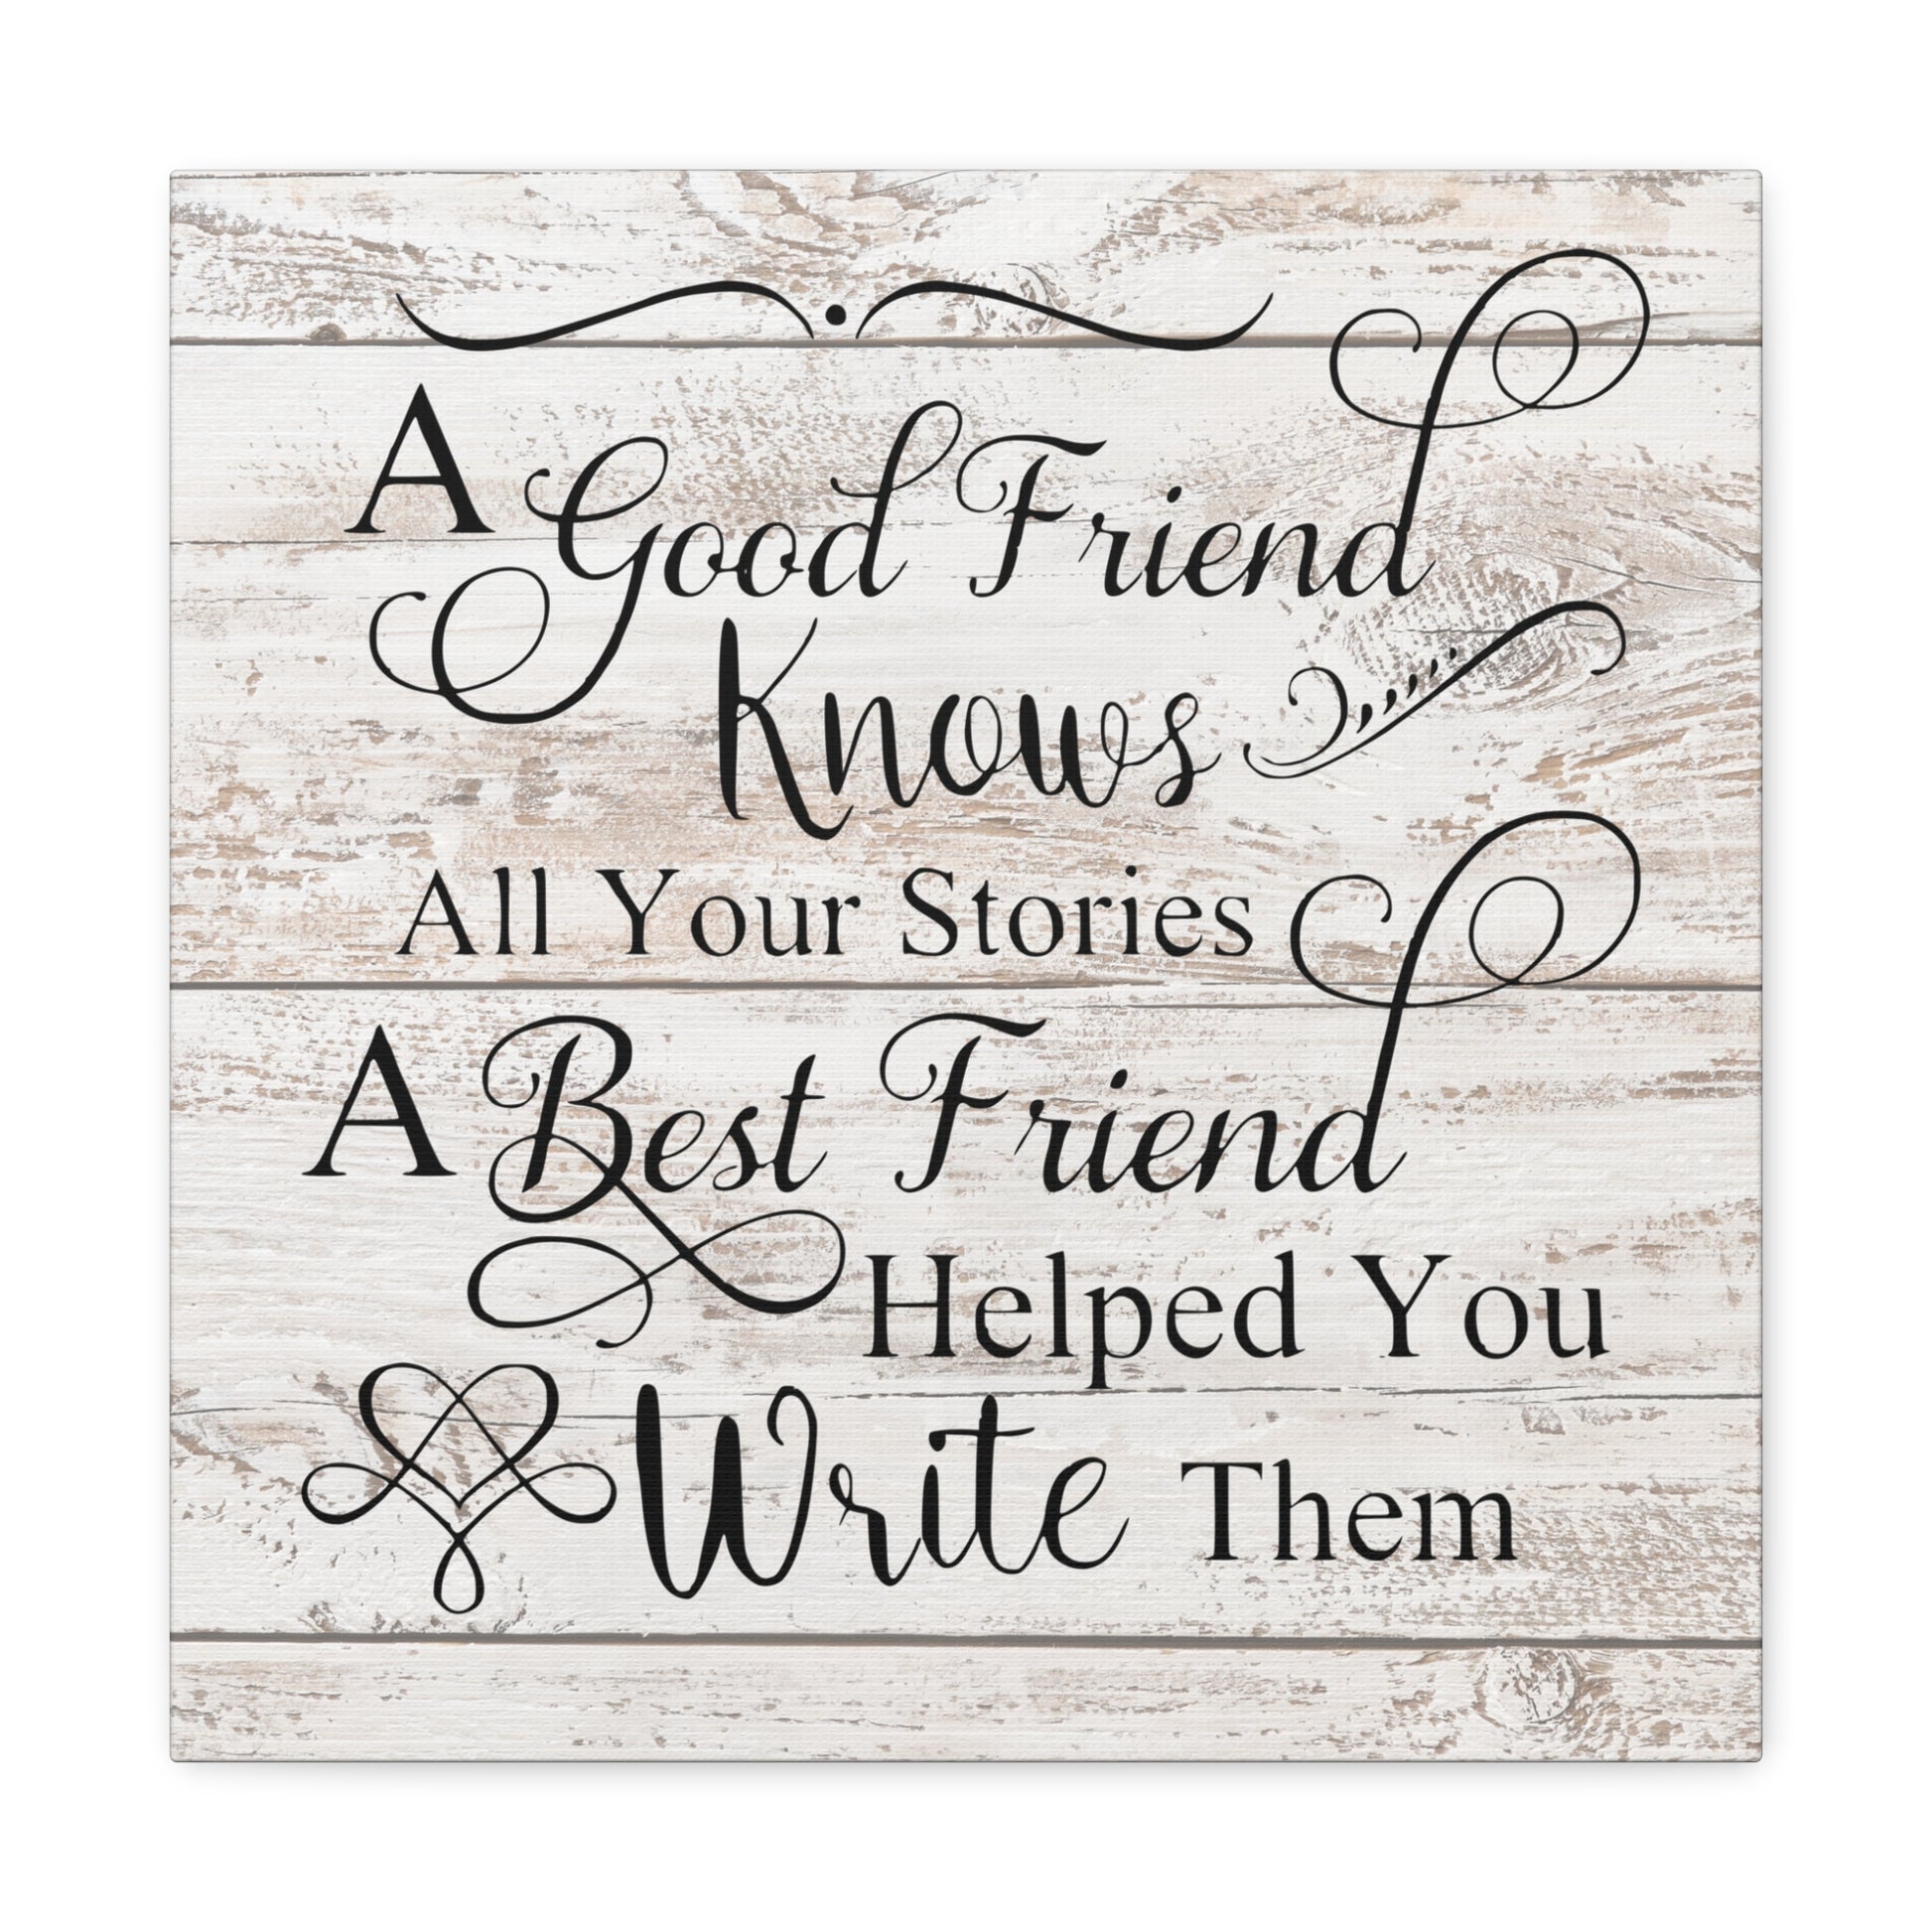 "Rustic Wooden White and Grey Tones Canvas Print" - Featuring a heartfelt friendship quote, ideal for home or office decor.